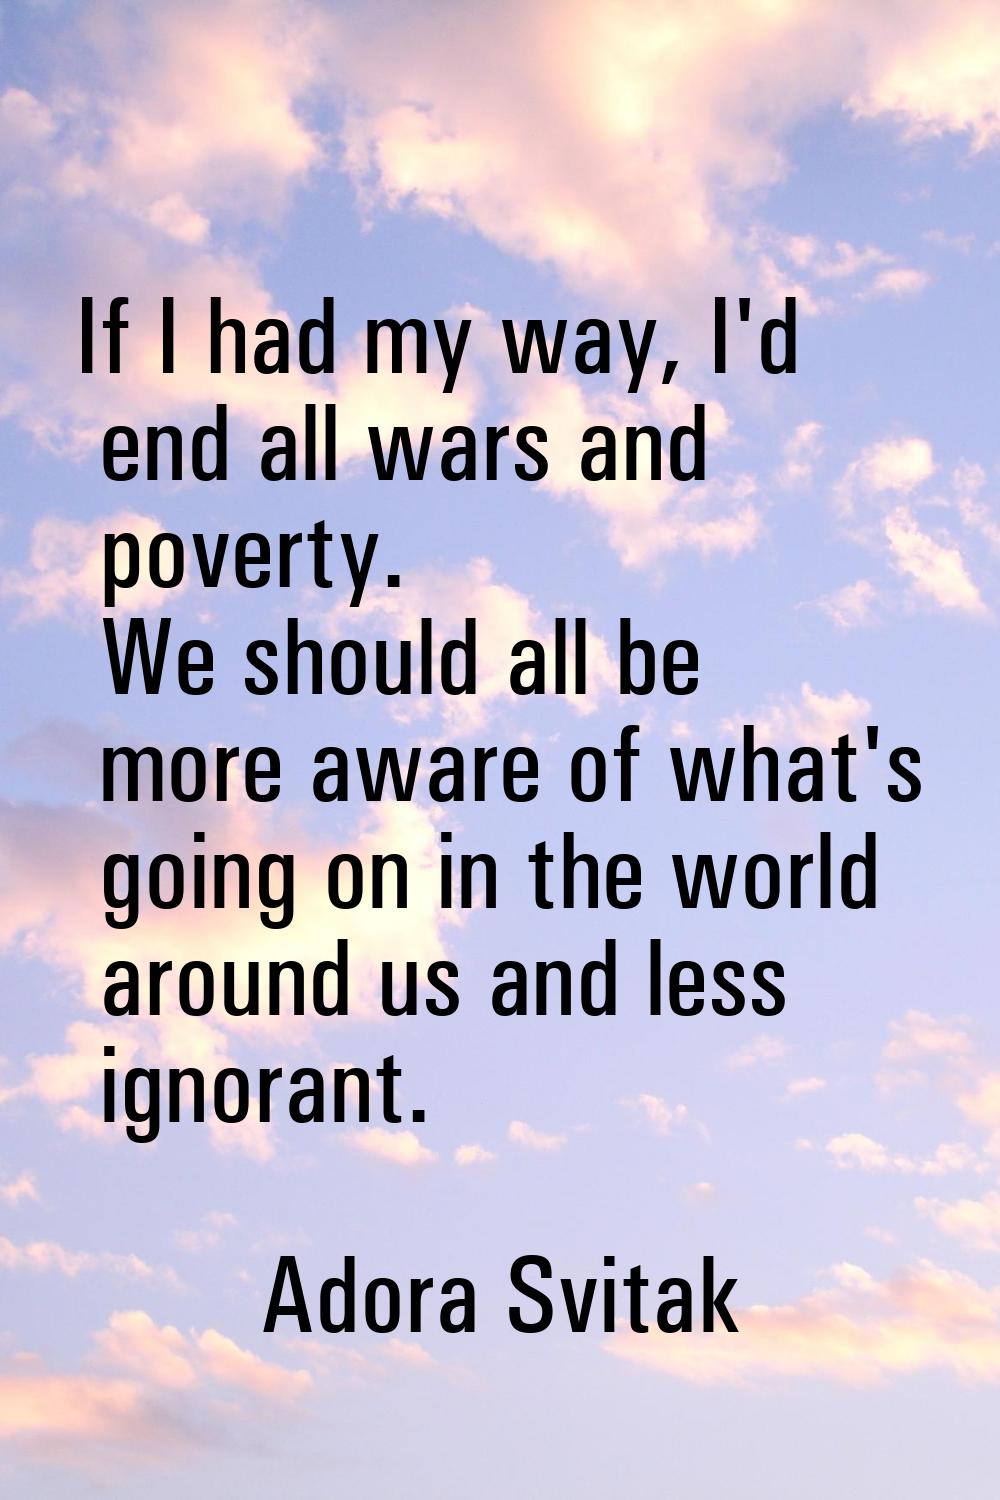 If I had my way, I'd end all wars and poverty. We should all be more aware of what's going on in th